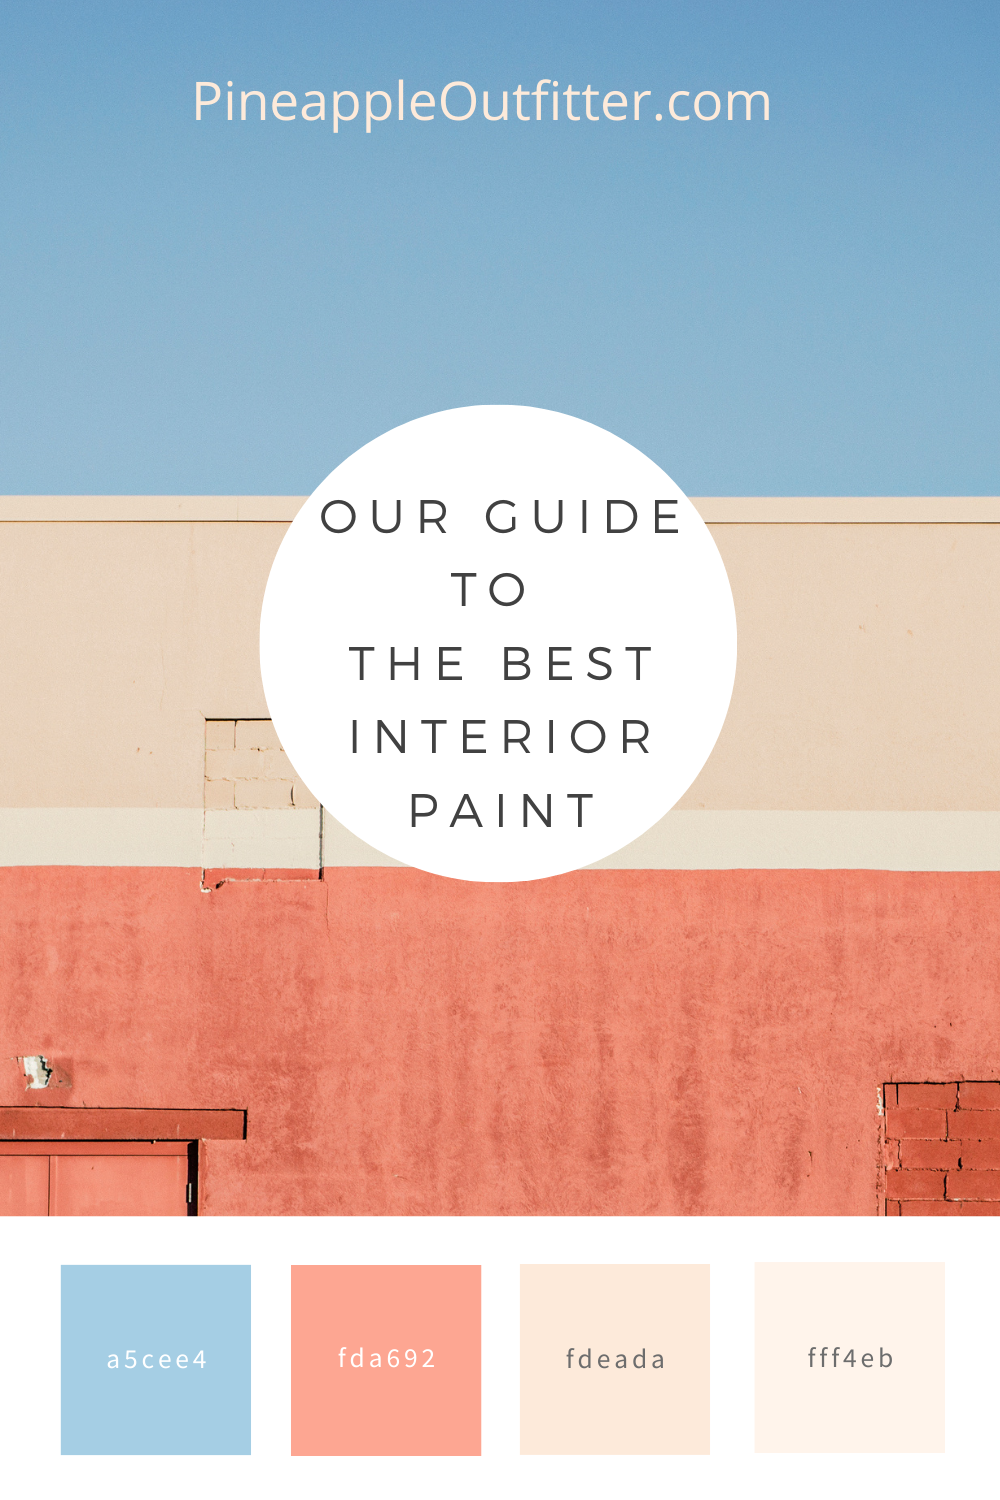 How to choose the best interior paint